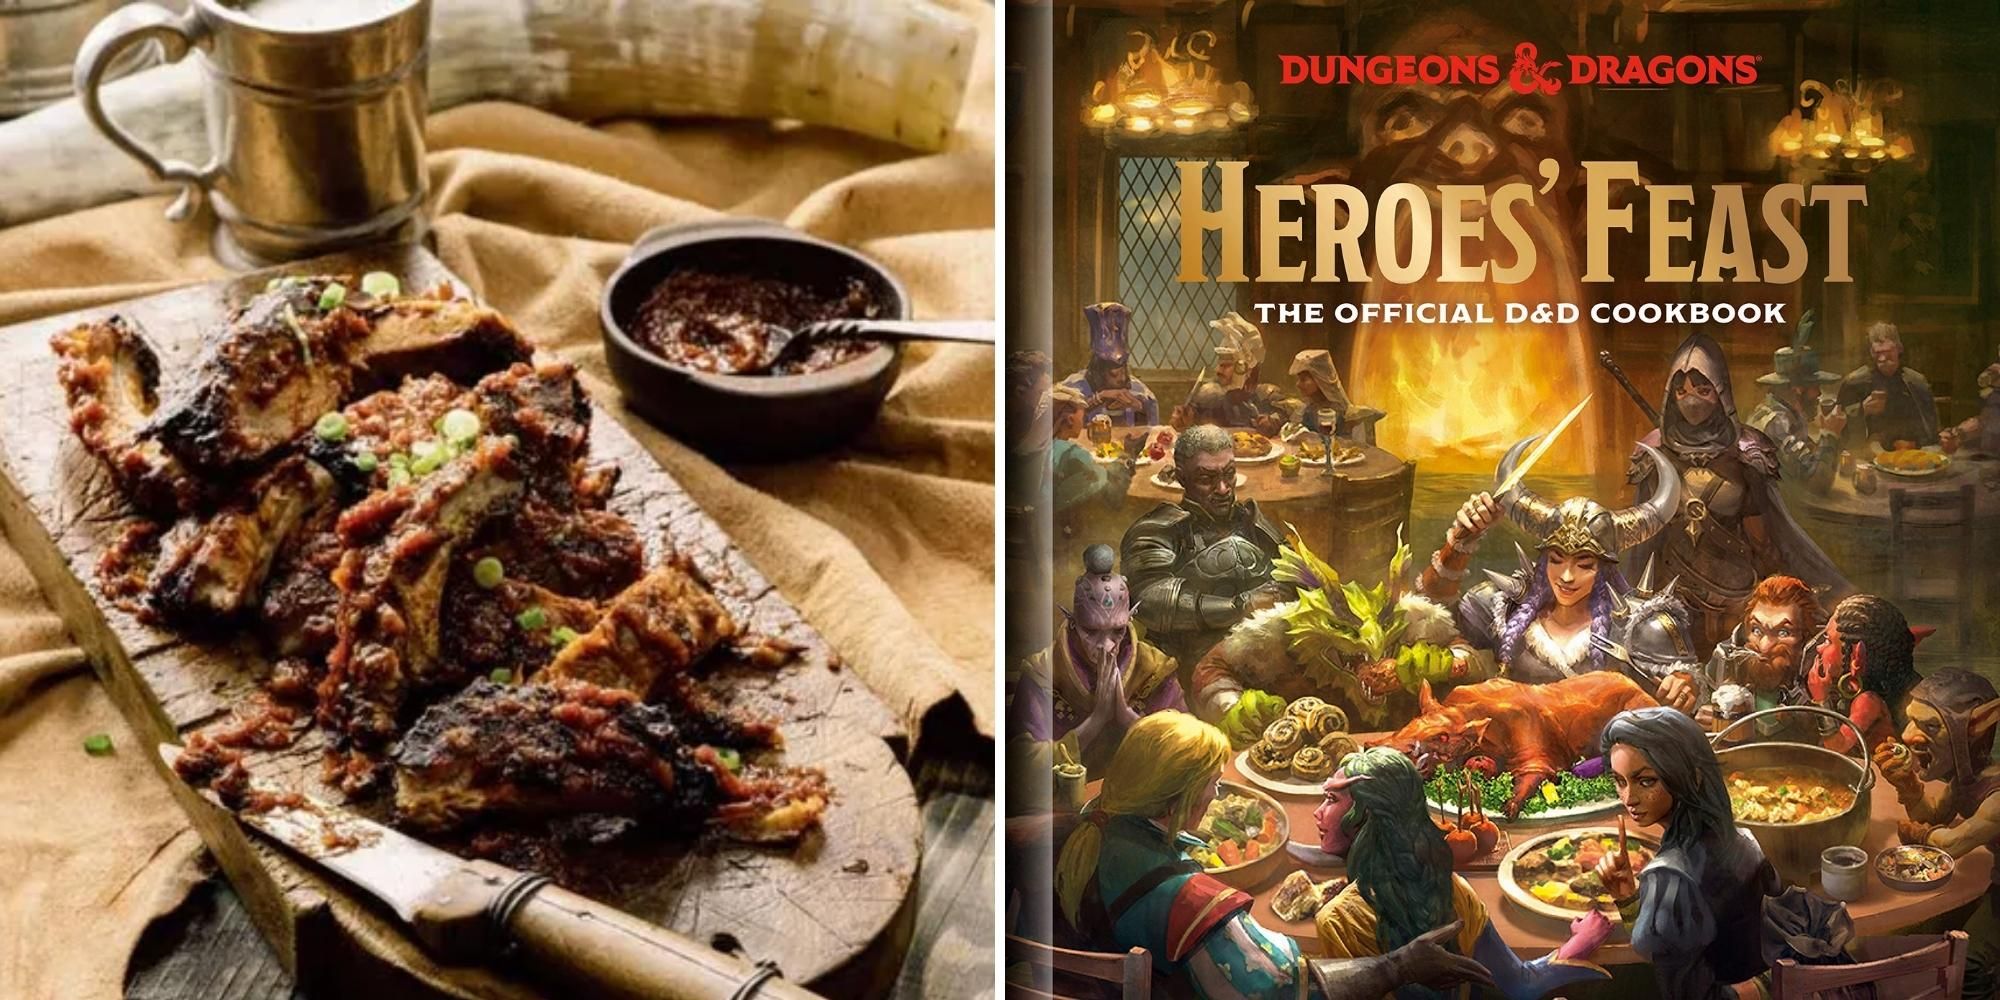 Ribs recipe from Heroes’ Feast The Official D&D Cookbook